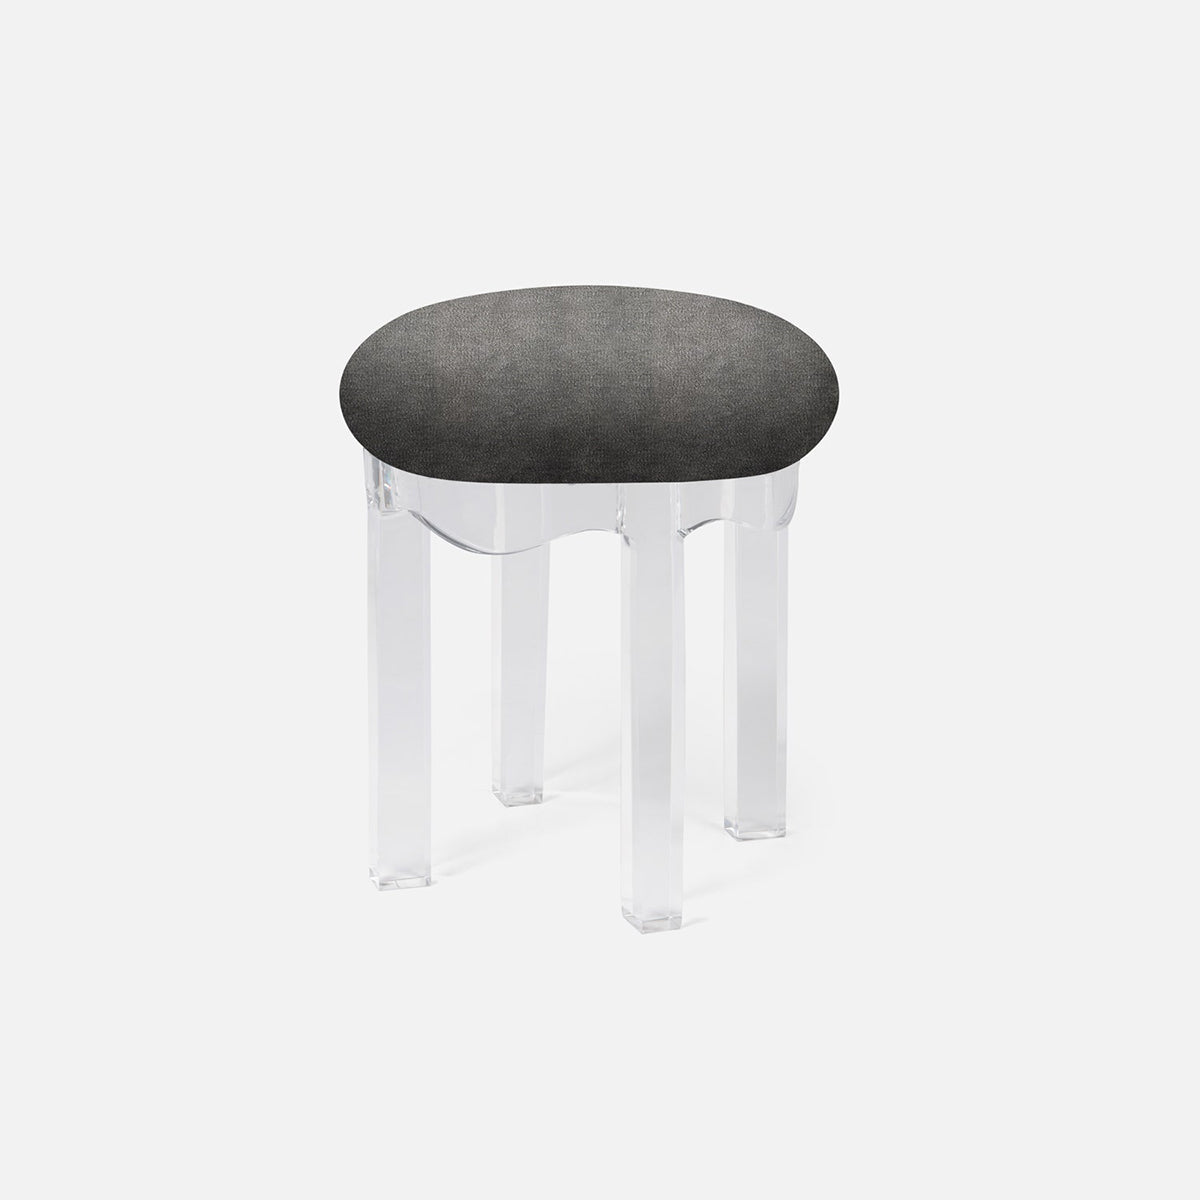 Made Goods Marston Upholstered Round Single Bench in Mondego Cotton Jute